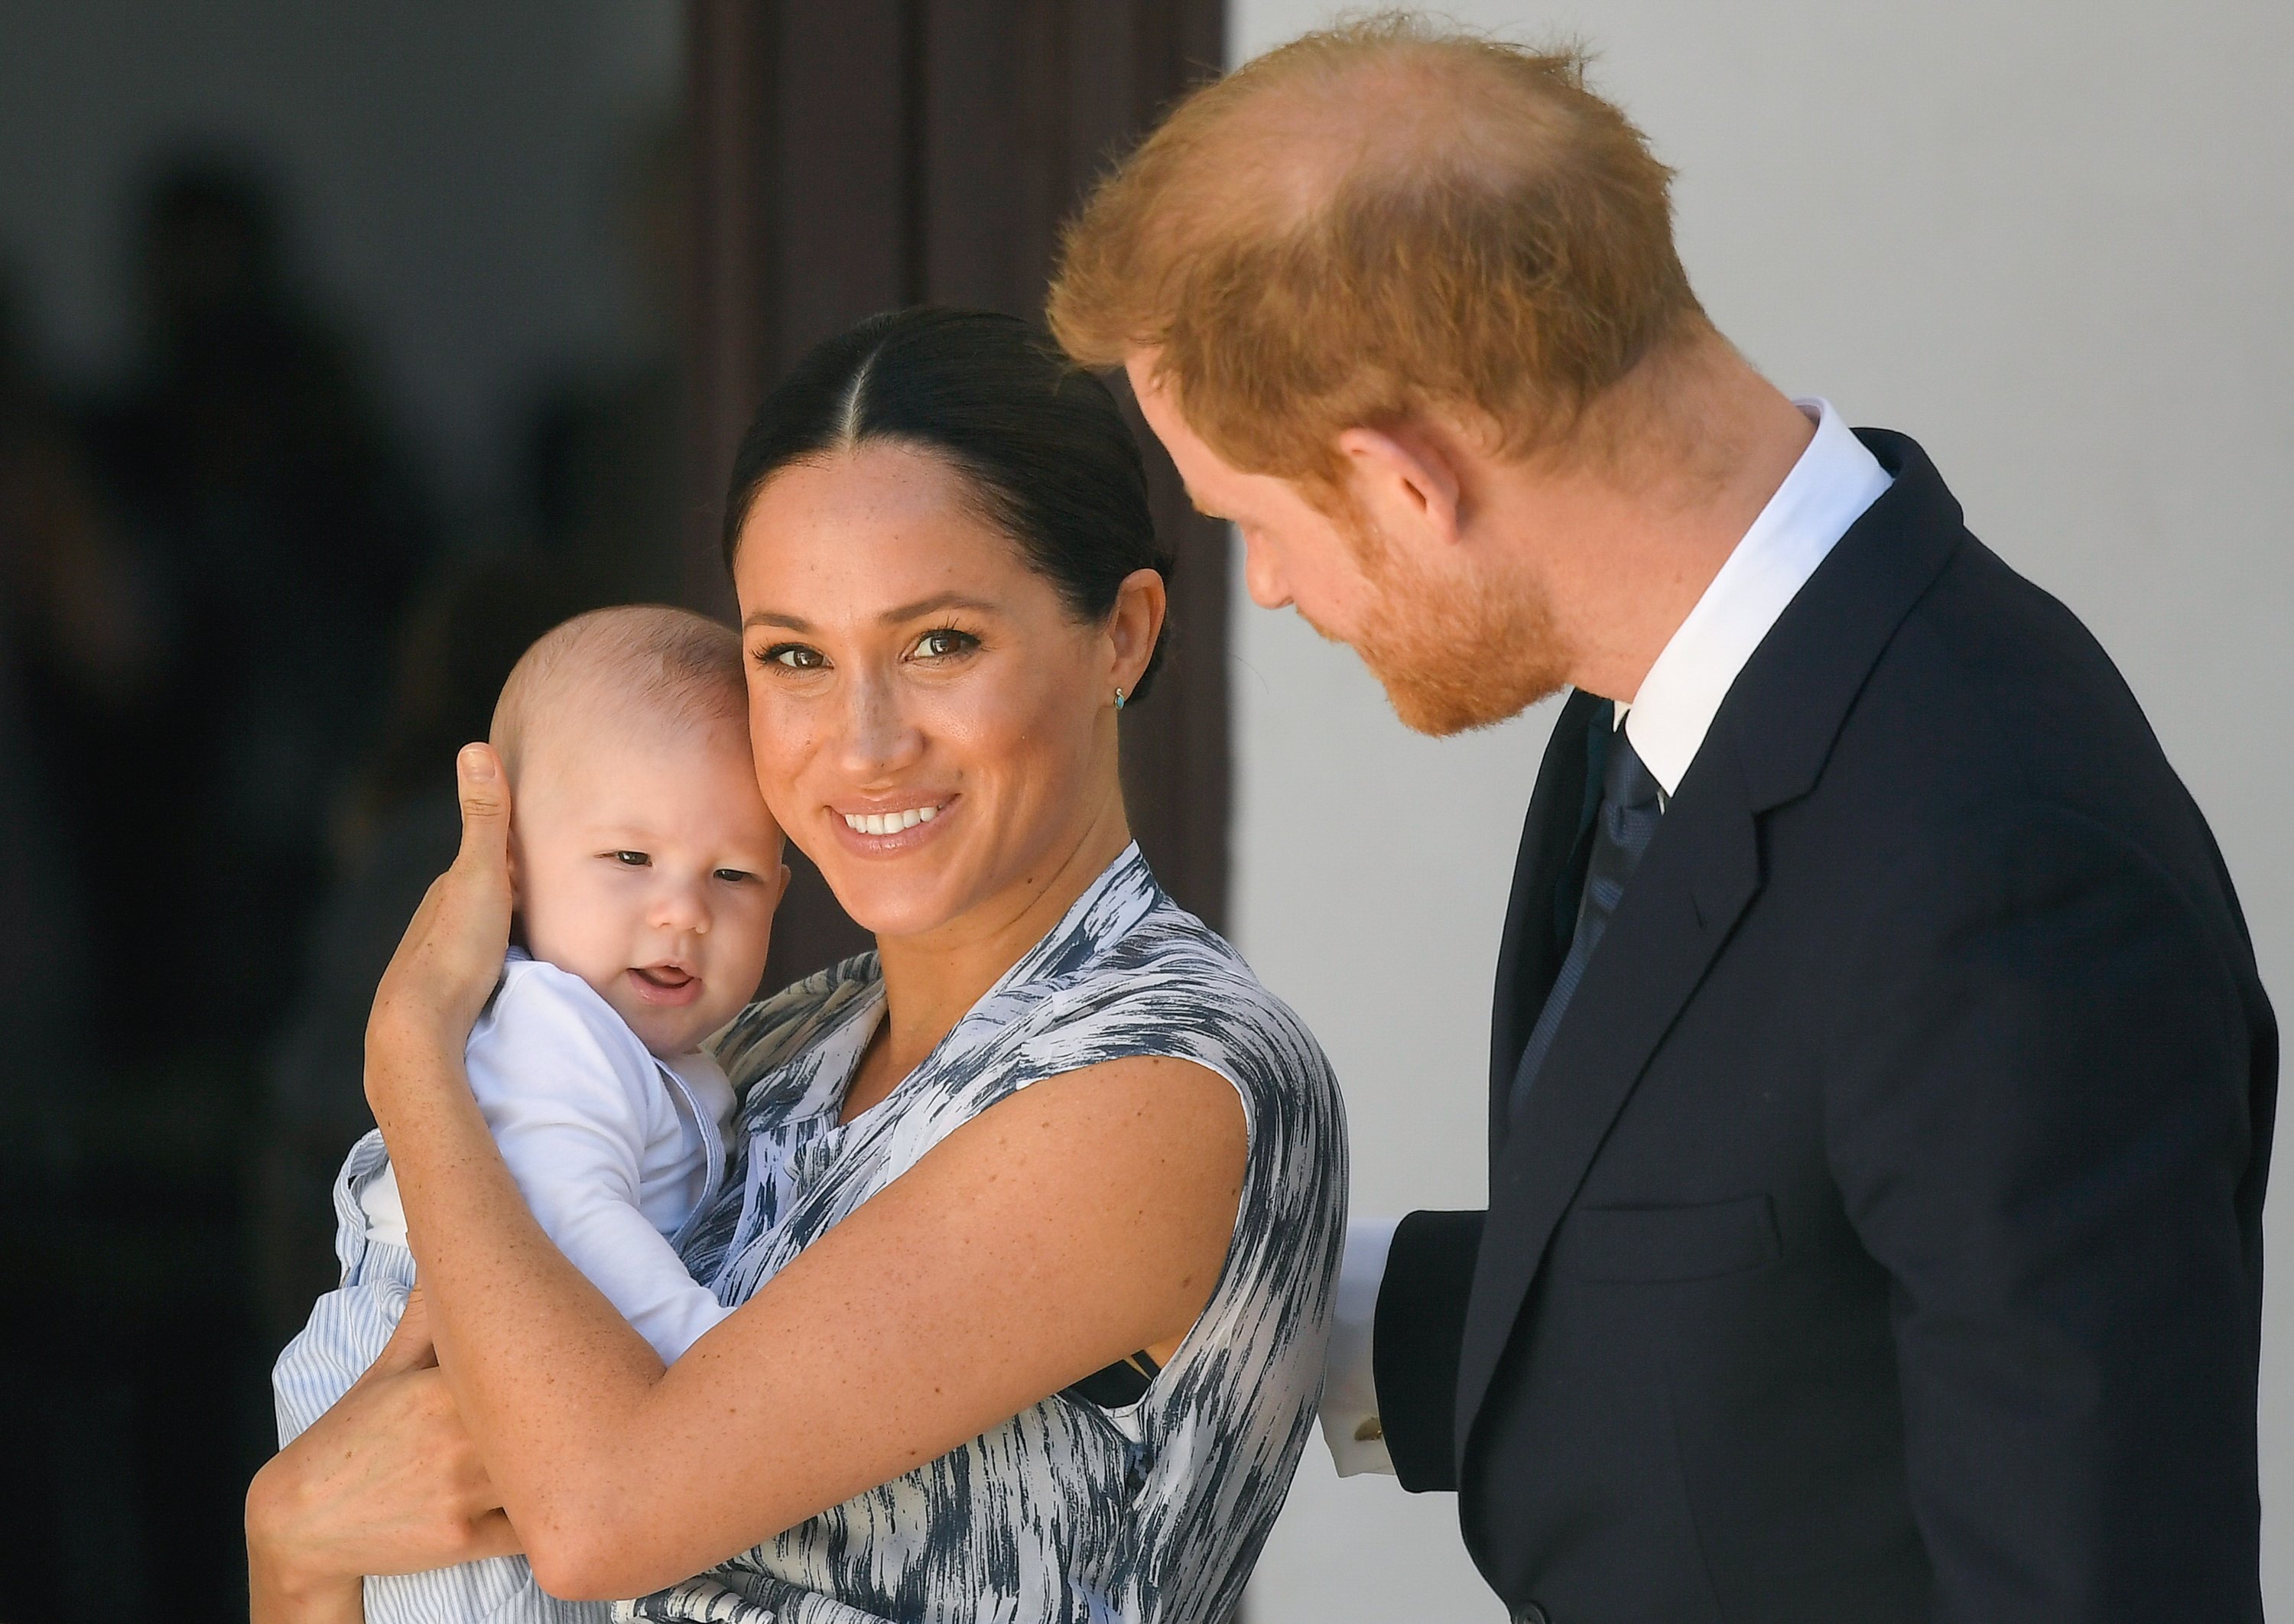 Prince Harry, Duke of Sussex, Meghan, Duchess of Sussex and their son Archie Mountbatten-Windsor. | Source: Getty Images